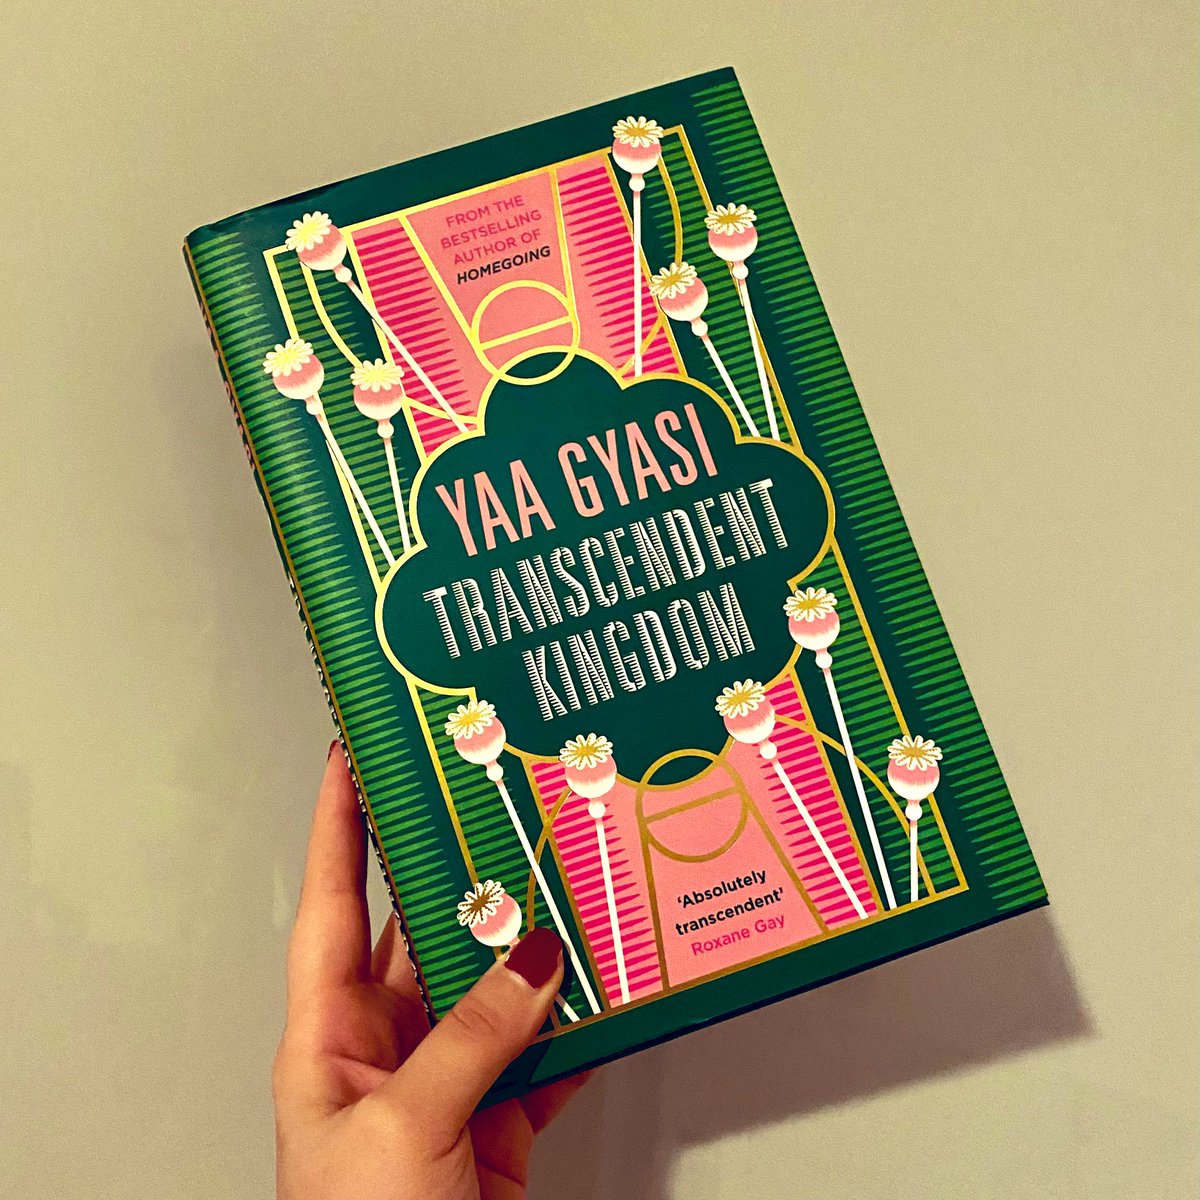 This is just so so wonderful, and I love Yaa Gyasi so so much. #TranscendentKingdom